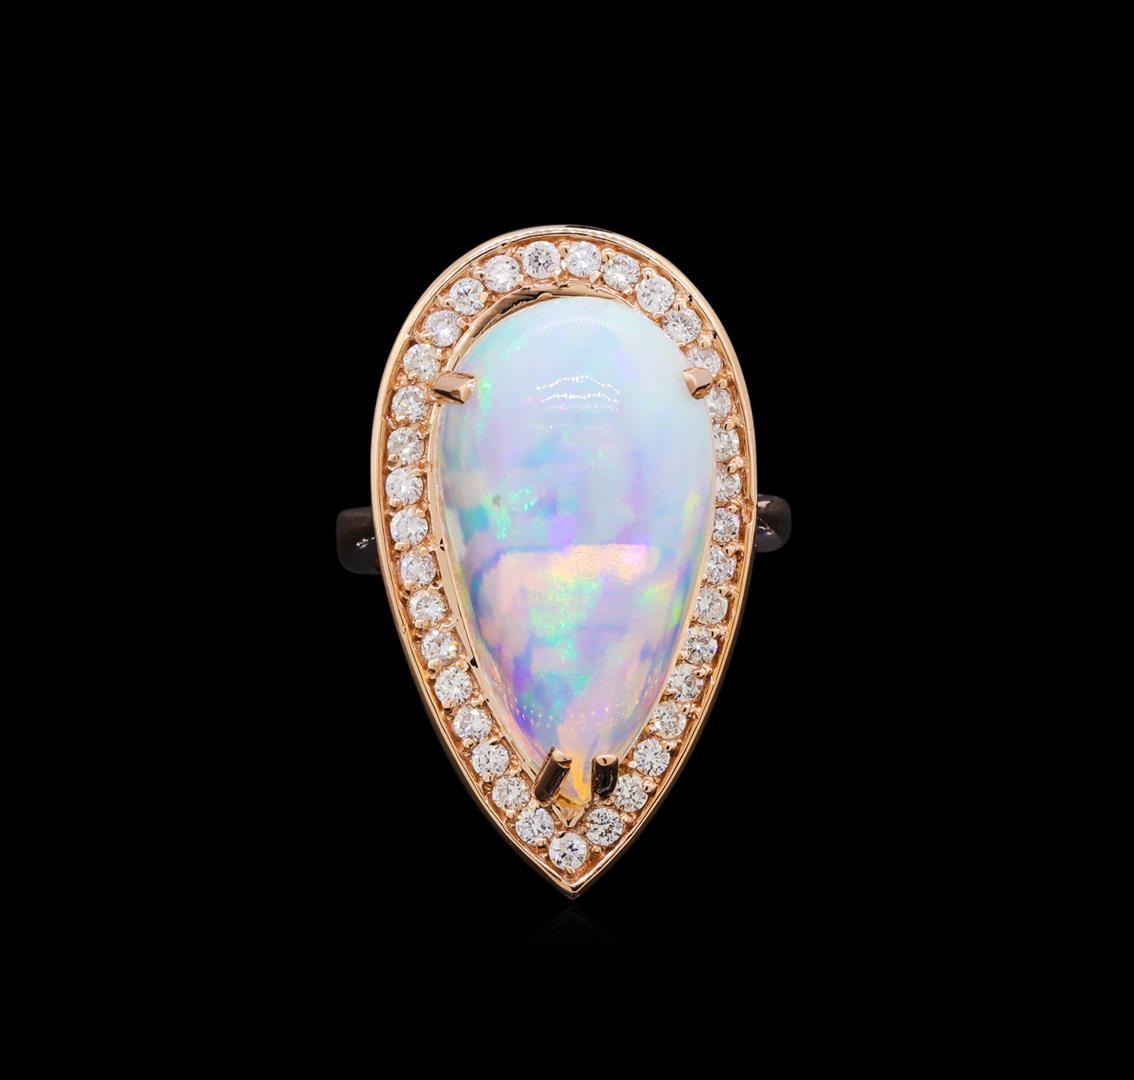 9.35 ctw Opal and Diamond Ring - 14KT Rose Gold